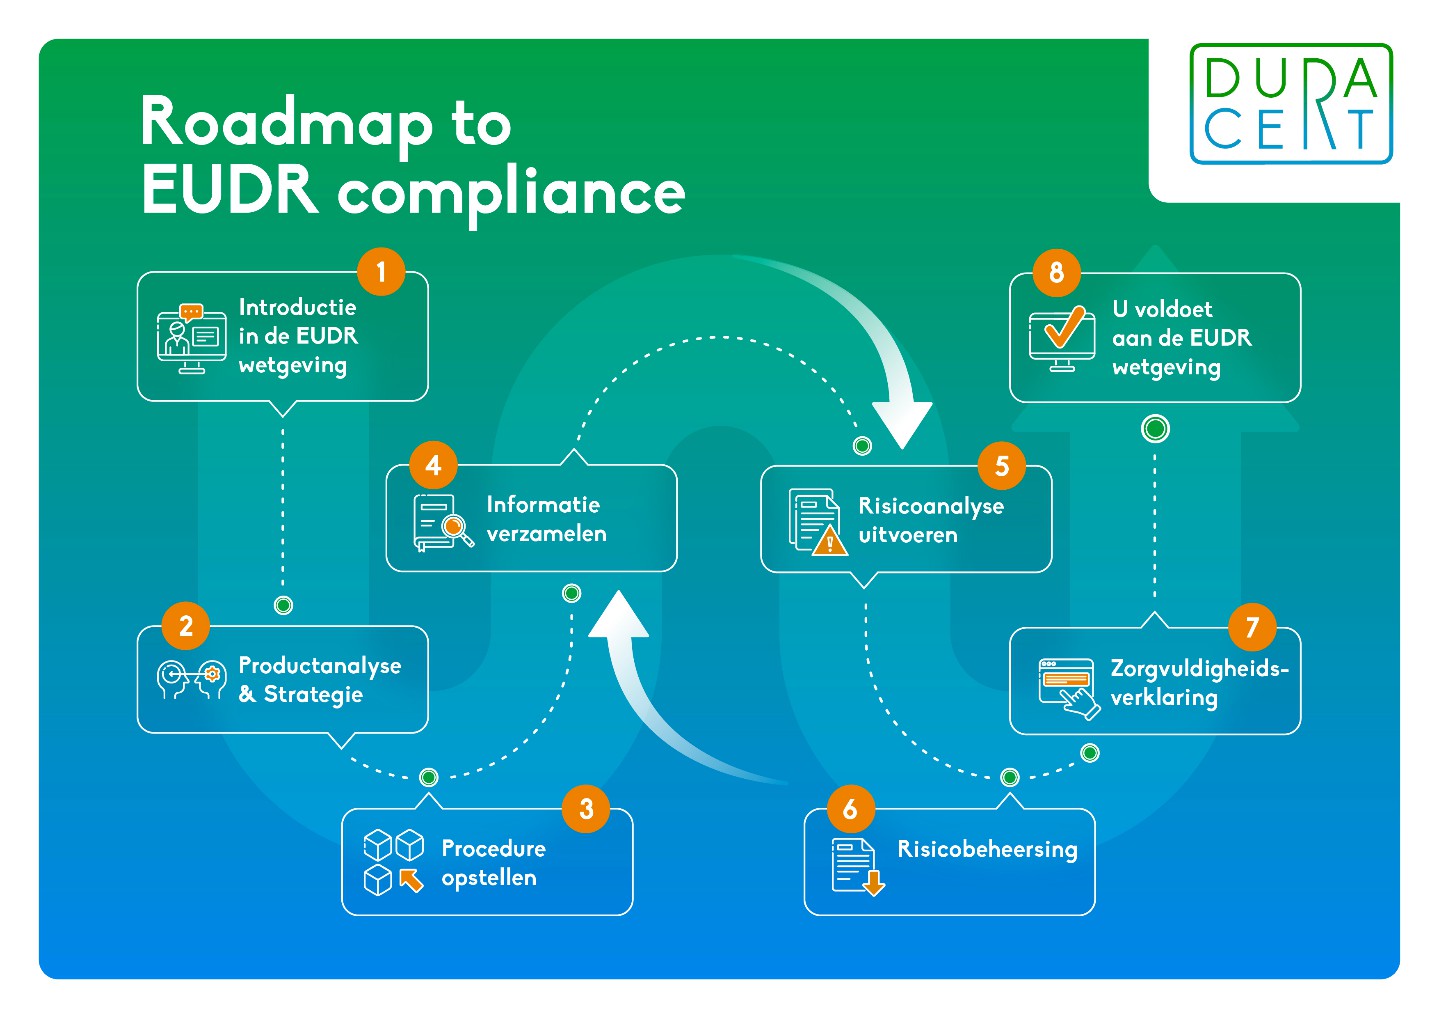 Afb 2: Roadmap to EUDR compliance